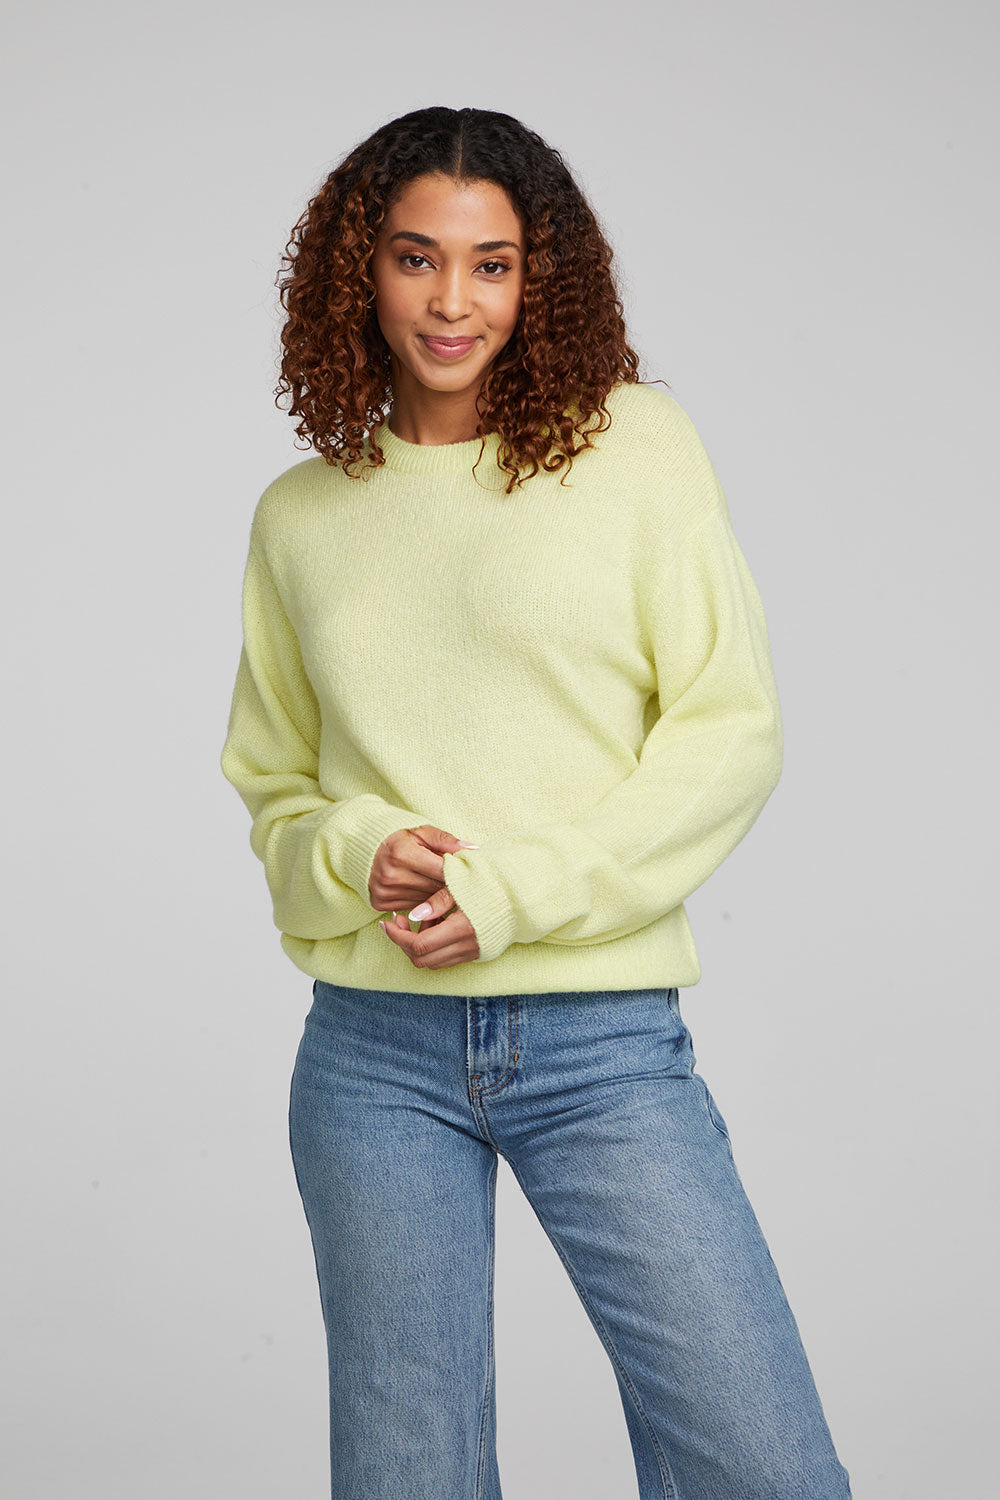 chaser-frankie-limelight-pullover-sweater-front-02